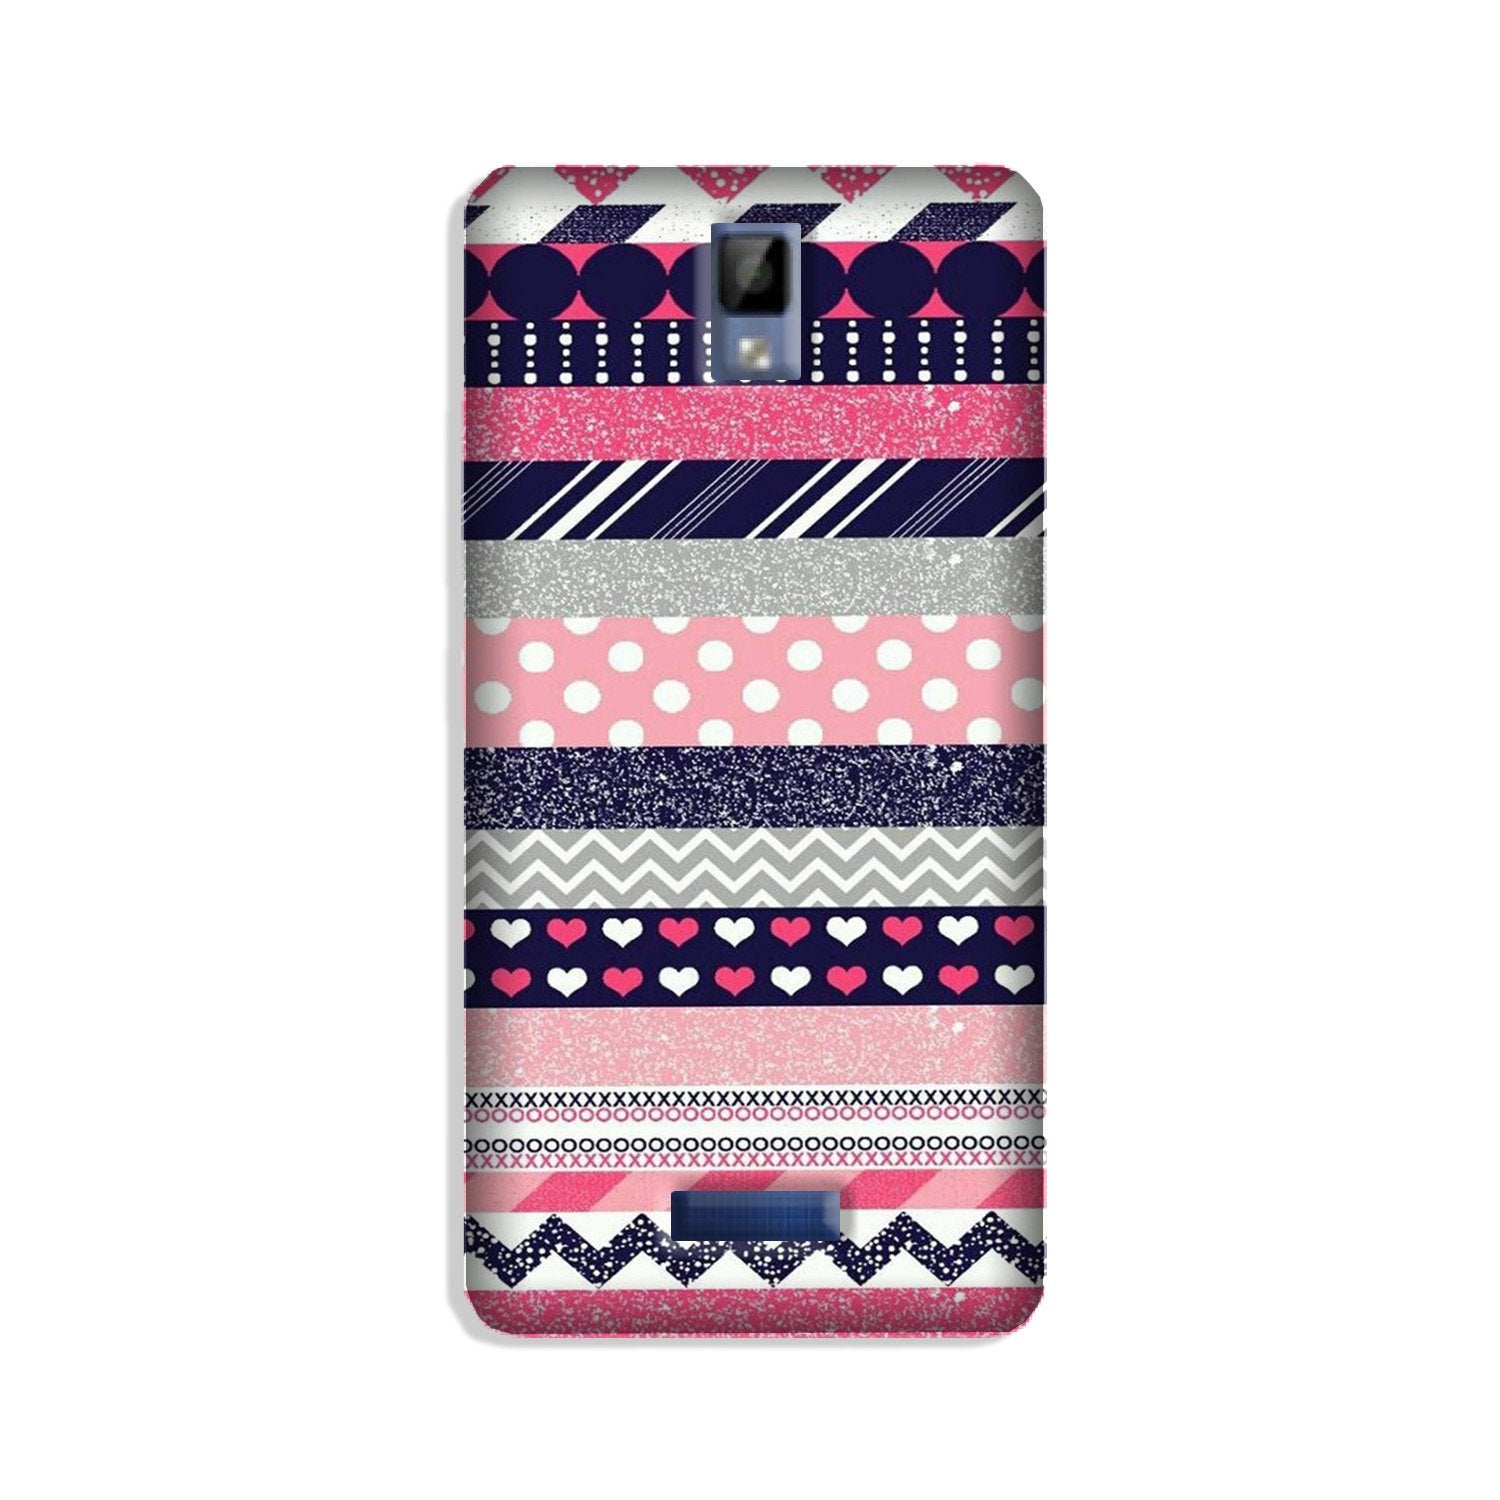 Pattern3 Case for Gionee P7